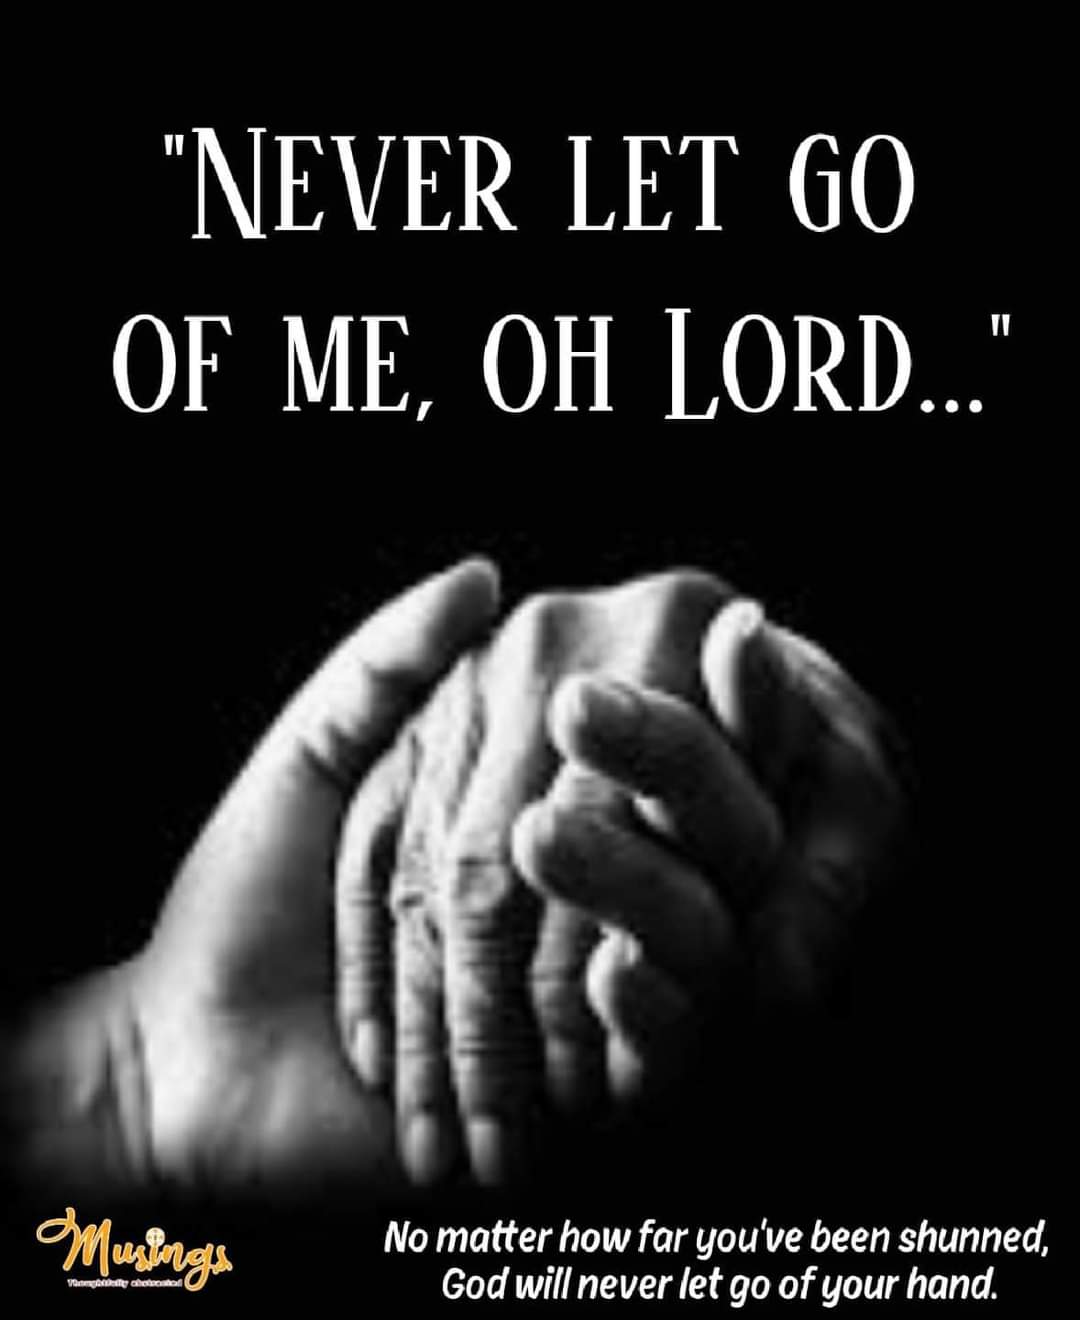 "NEVER LET GO OF ME, OH LORD..."